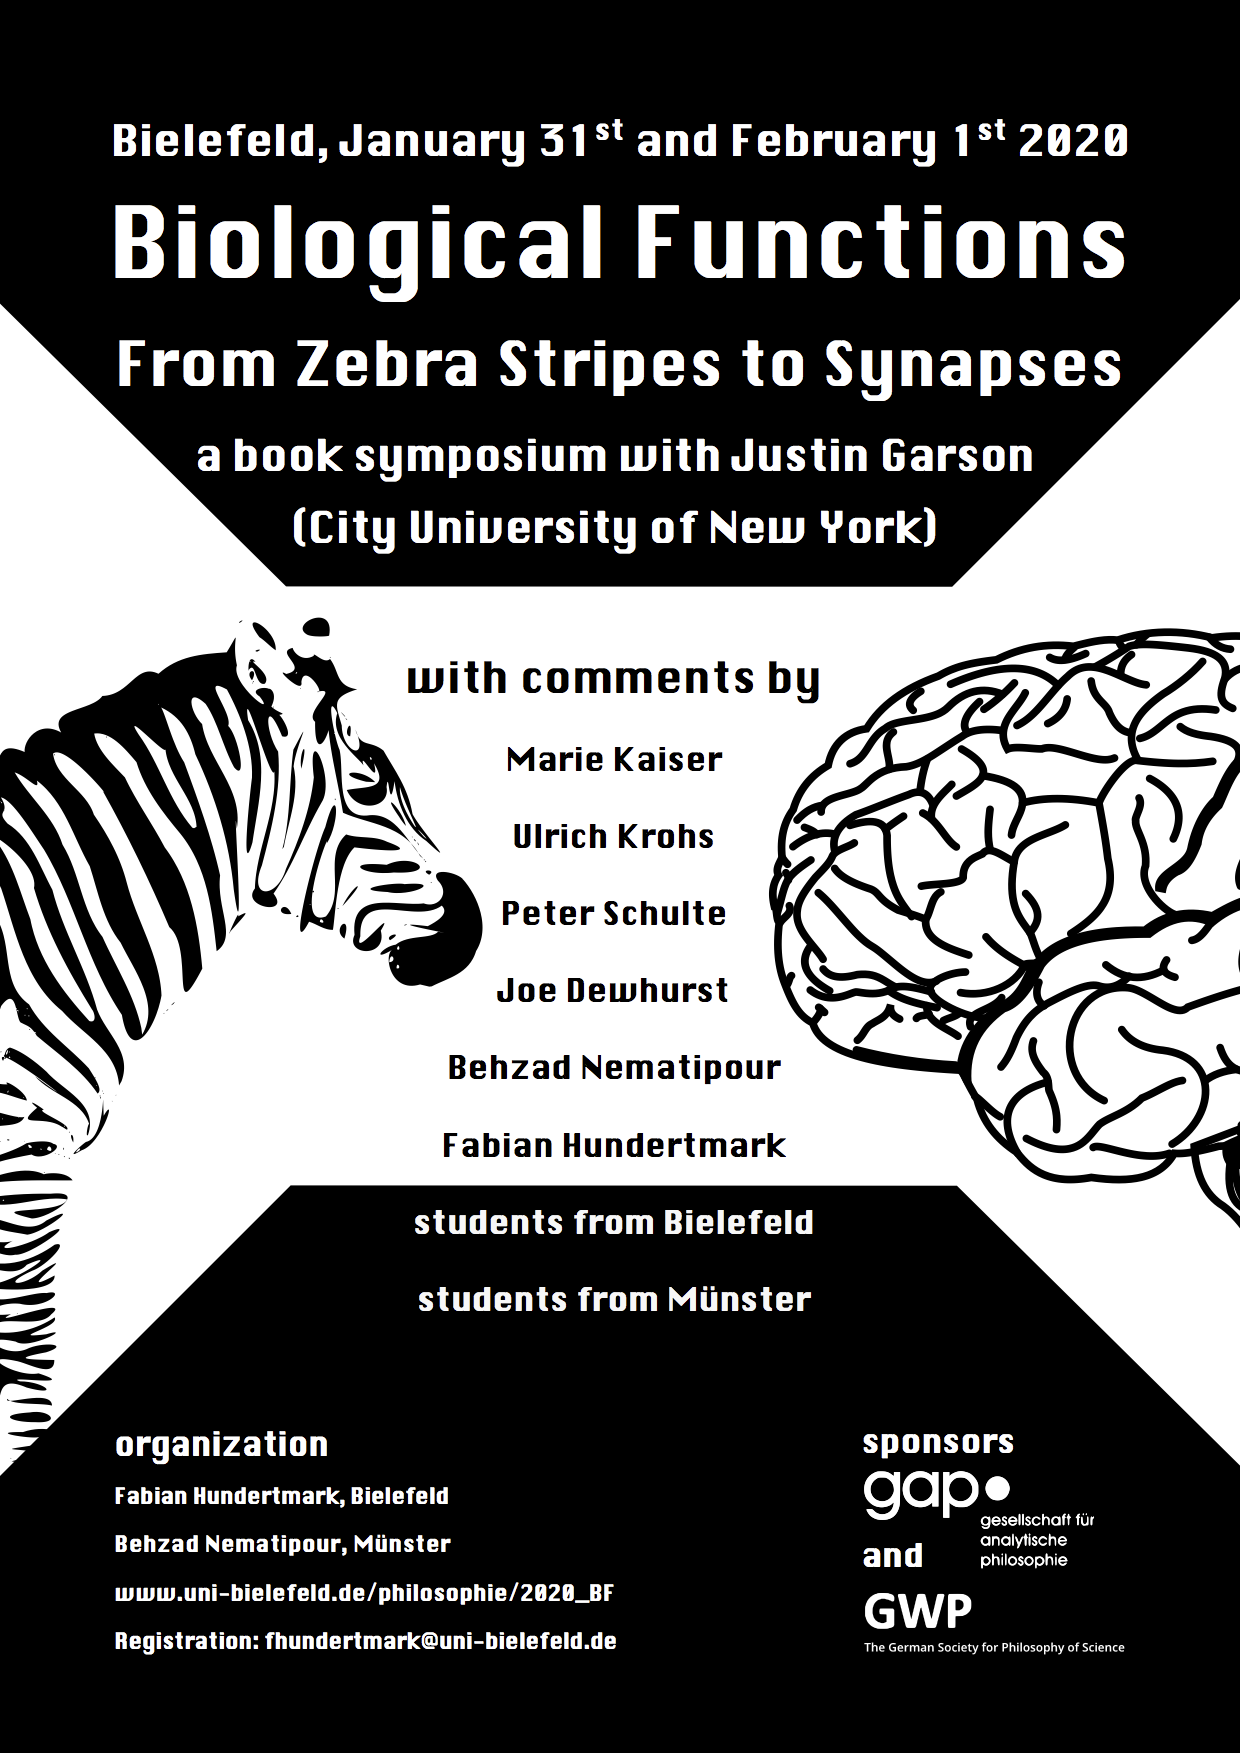 Poster: Biological Functions From Zebra Stripes to Synapses organization Fabian Hundertmark, Bielefeld Behzad Nematipour, Münster www.uni-bielefeld.de/philosophie/2020_BF Registration: fhundertmark@uni-bielefeld.de a book symposium with Justin Garson (City University of New York) with comments by Marie Kaiser Ulrich Krohs Peter Schulte Joe Dewhurst Behzad Nematipour Fabian Hundertmark students from Bielefeld students from Münster sponsors and Bielefeld, January 31st and February 1st 2020